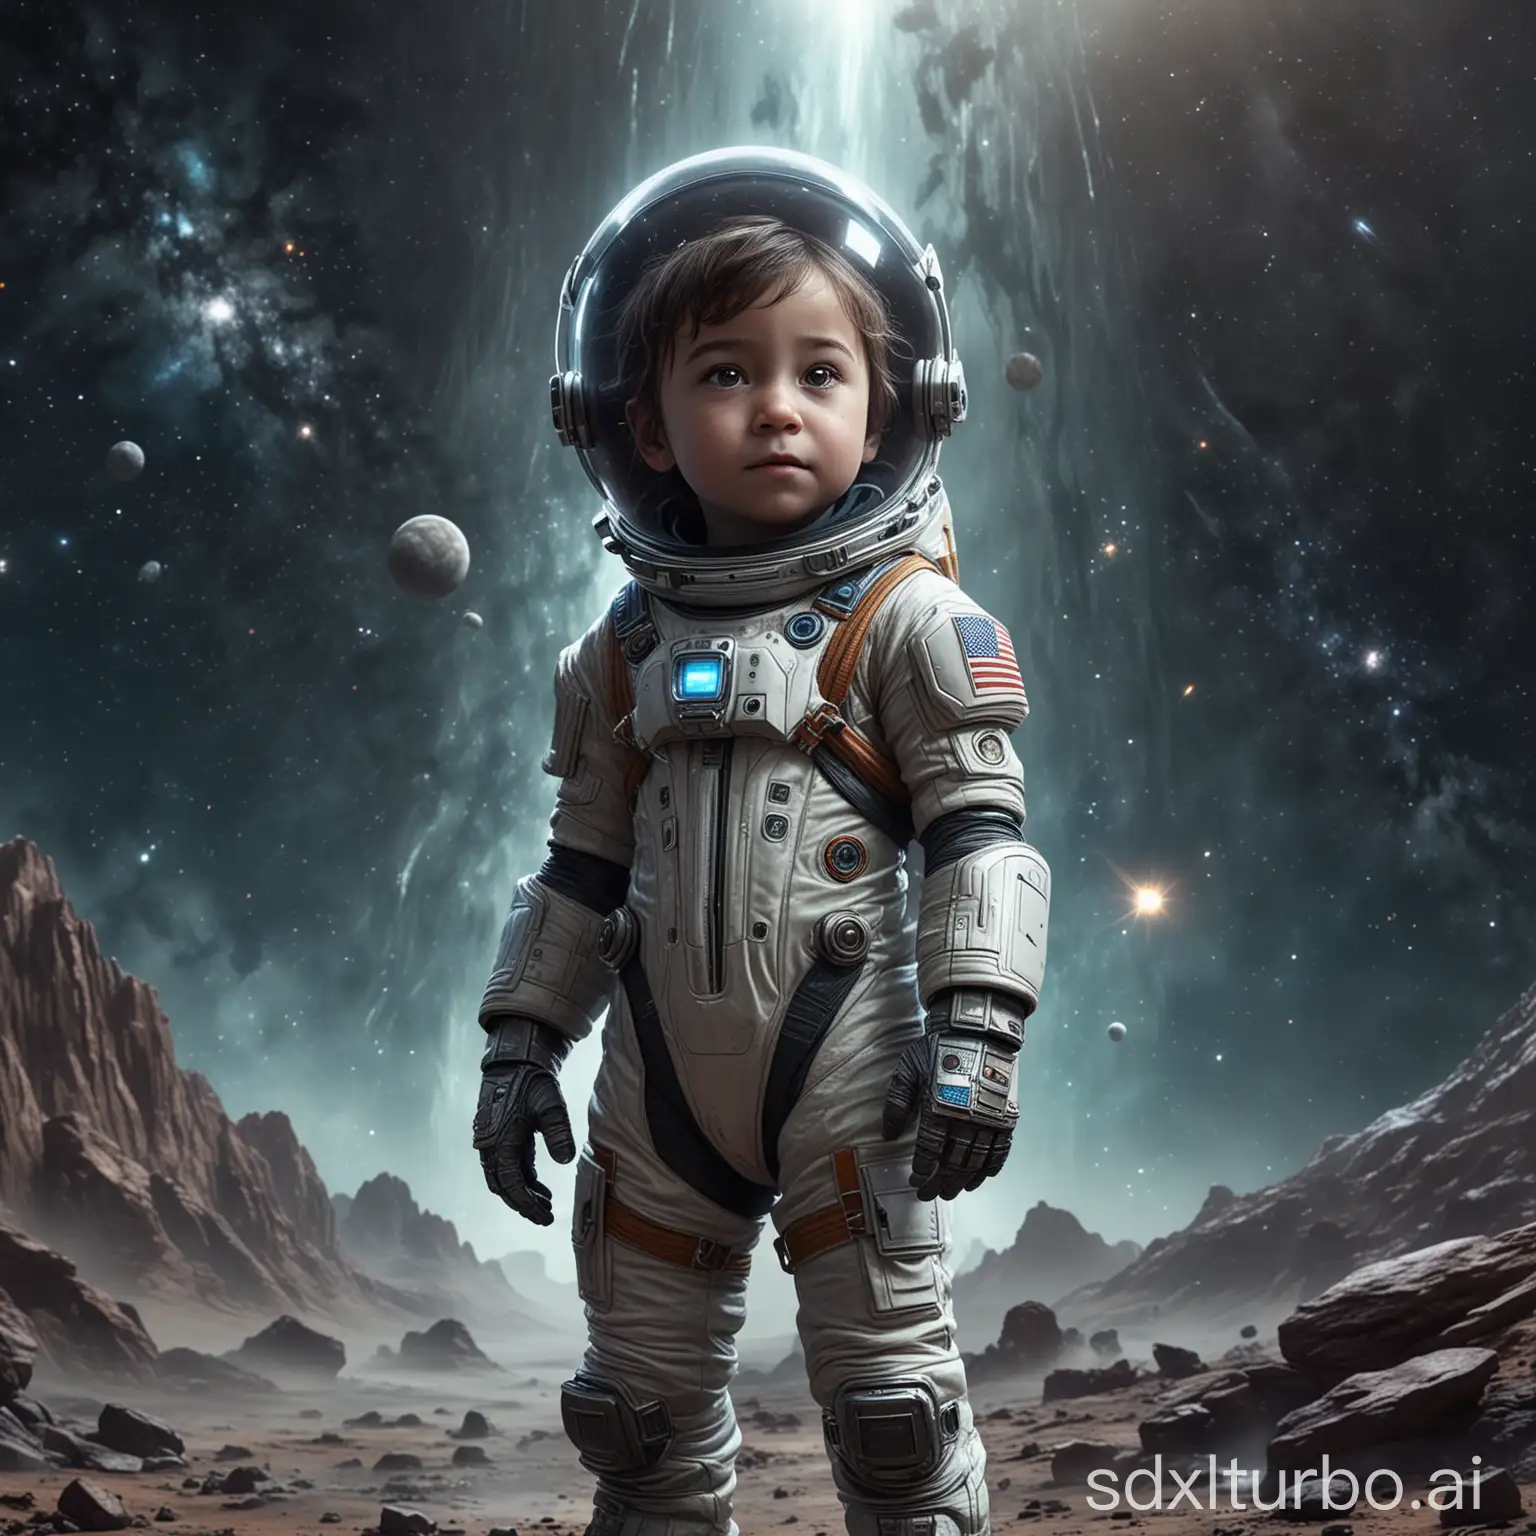 Little child Astronaut, Wearing A Futuristic Space Suit, Hopeful, Determined, Brave. Highly Detailed Concept Art, Intricate Textures, Interstellar Background, Space Travel, Nebula, Cosmos Dust with masculine face, game character, stands at full height